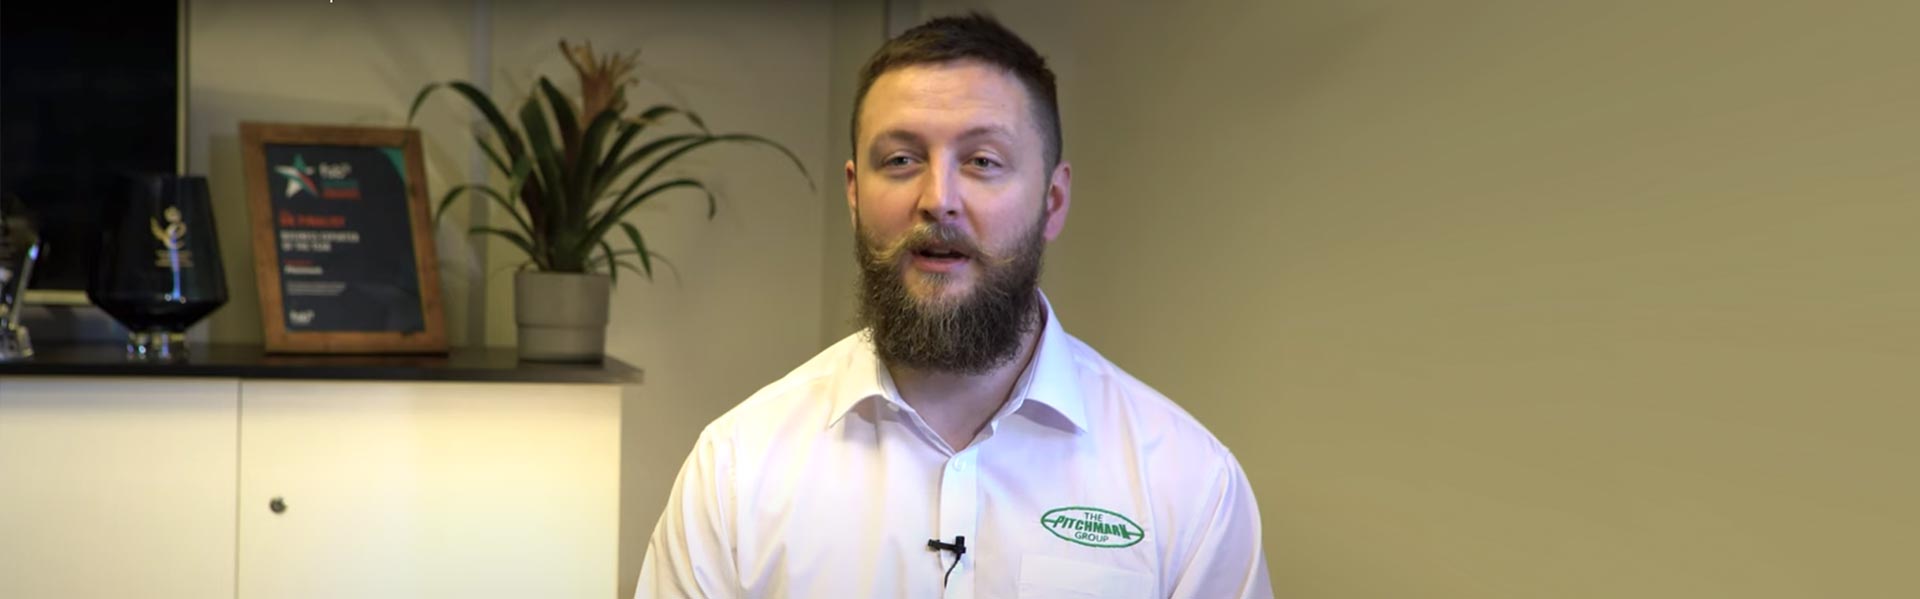 GetSet for Growth helps The Pitchmark Group on their growth journey